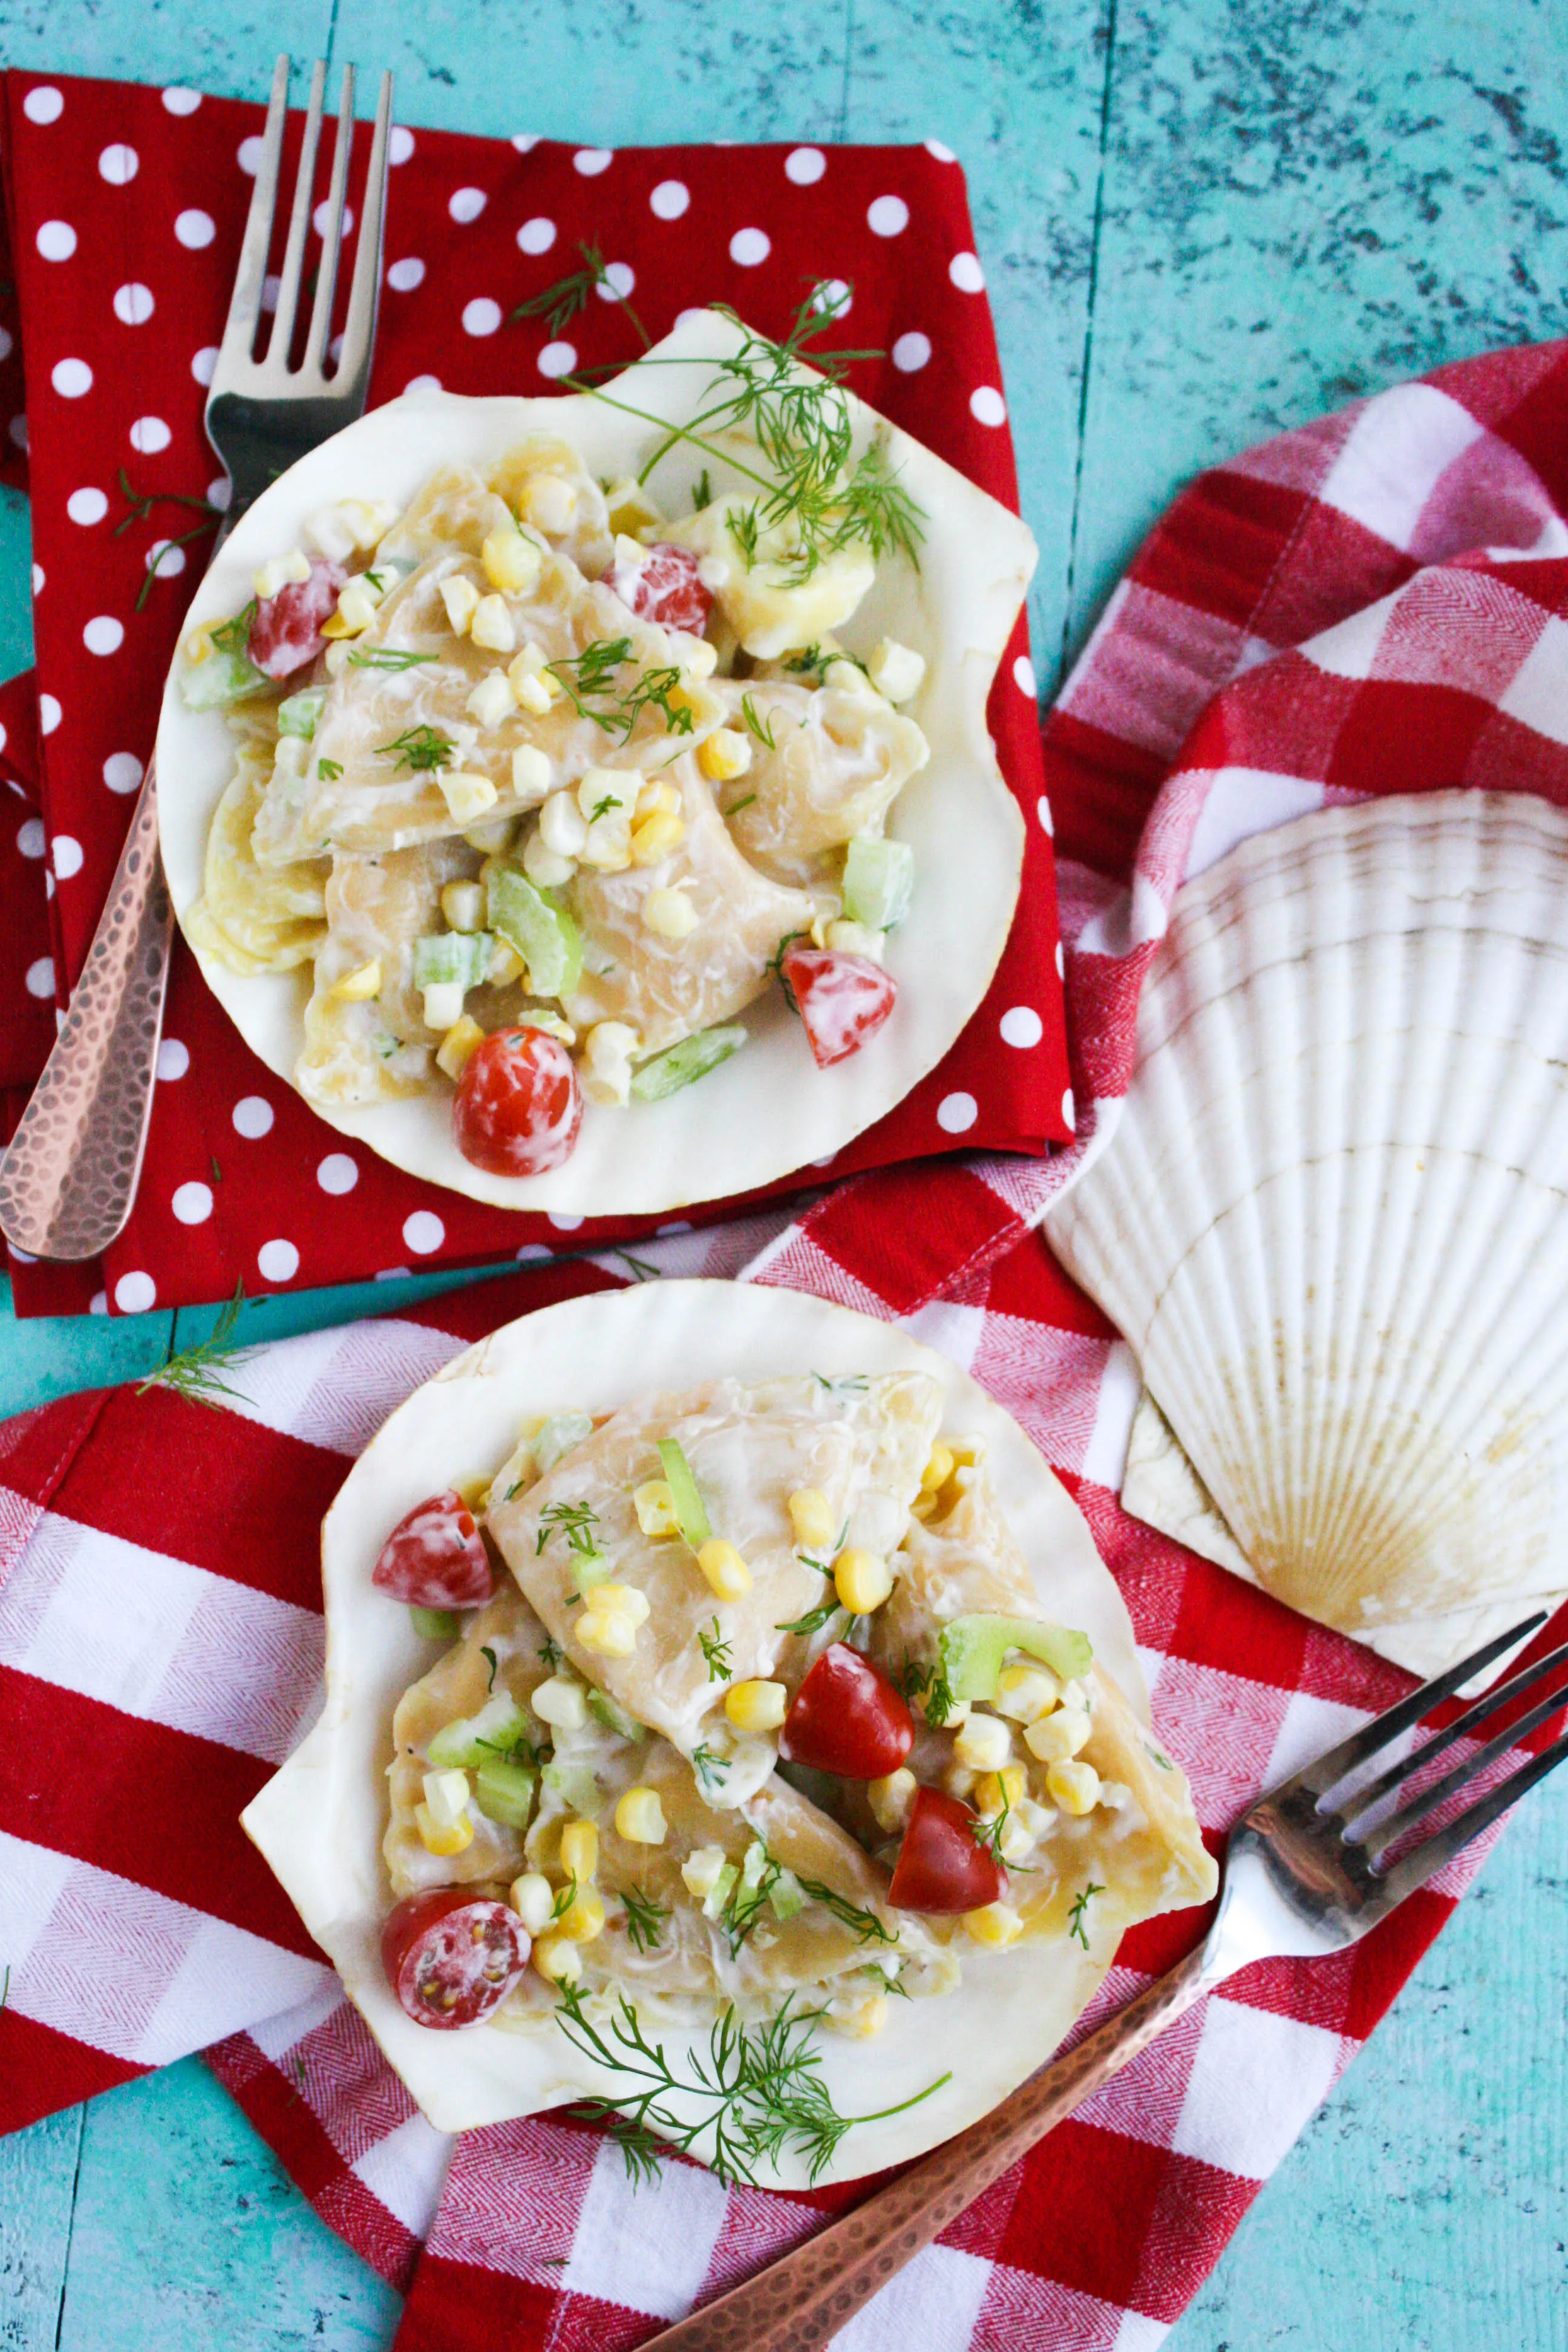 Lobster Ravioli Pasta Salad with Creamy Lemon Dressing is a lovely summer dish. Lobster Ravioli Pasta Salad with Creamy Lemon Dressing is a nice dish for a summer gathering.